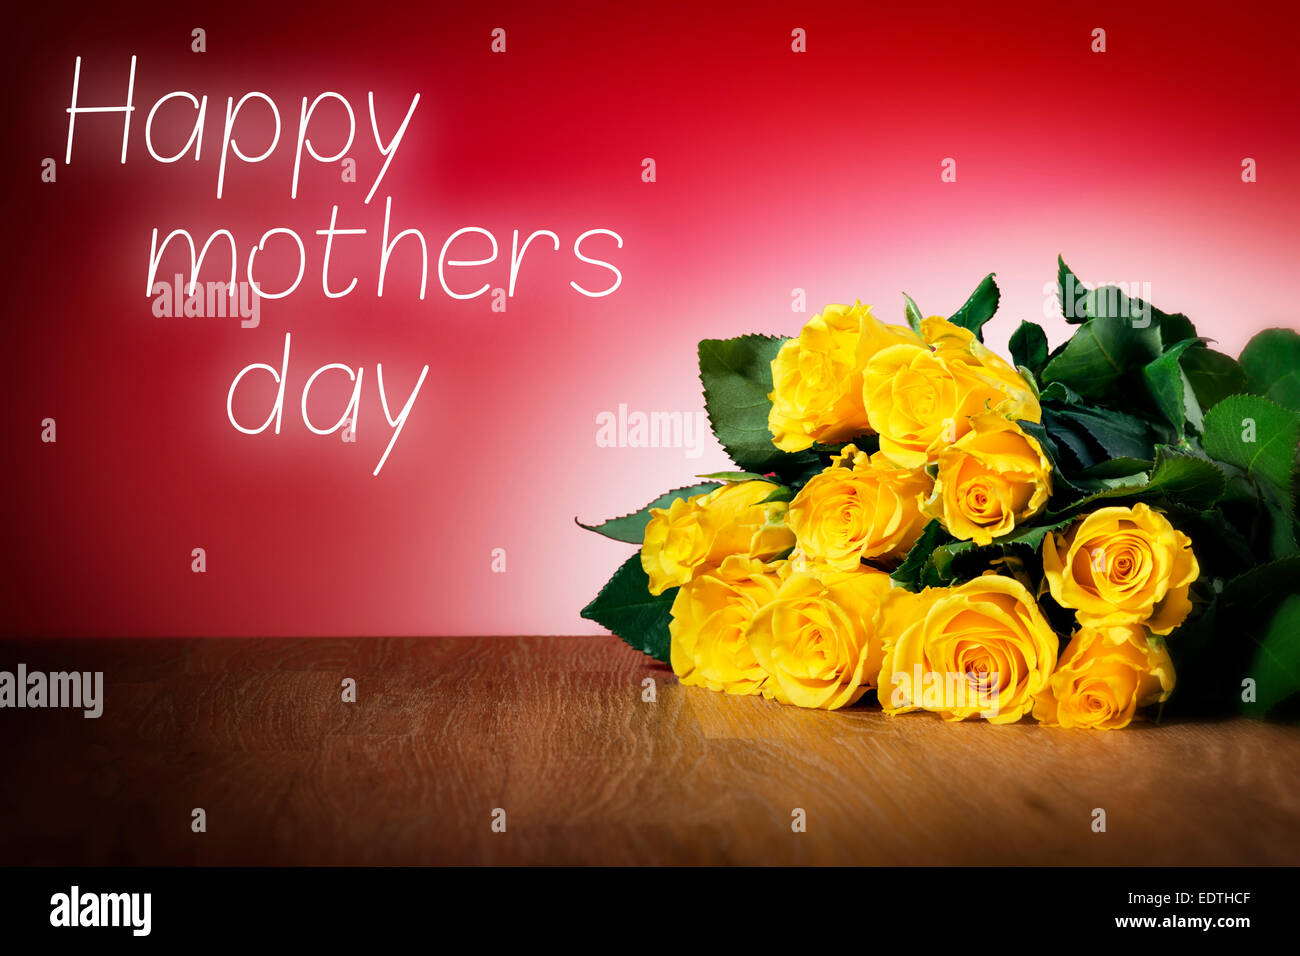 Bunch of yellow roses on a table and with red background, message happy mothers day Stock Photo